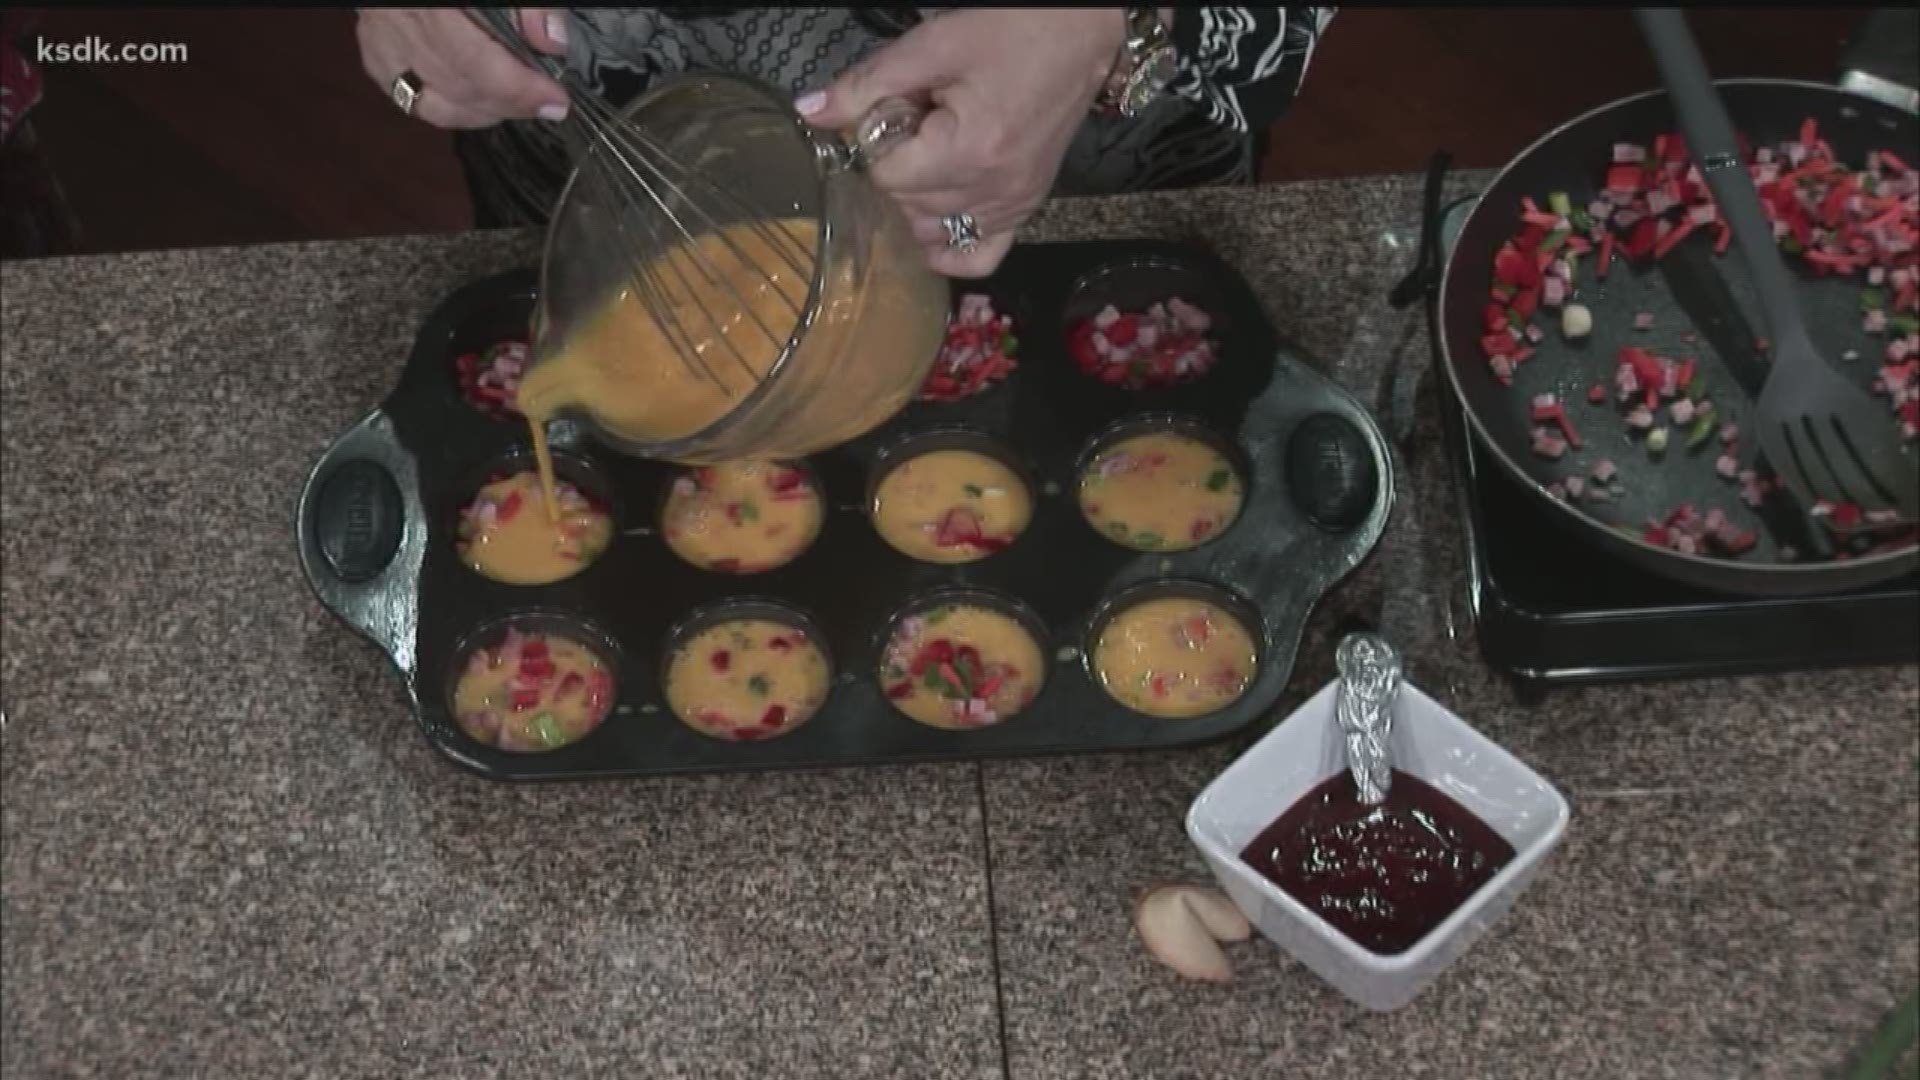 Kim Martin of Missouri Egg Council shared a recipe in honor of the Chinese New Year approaching.